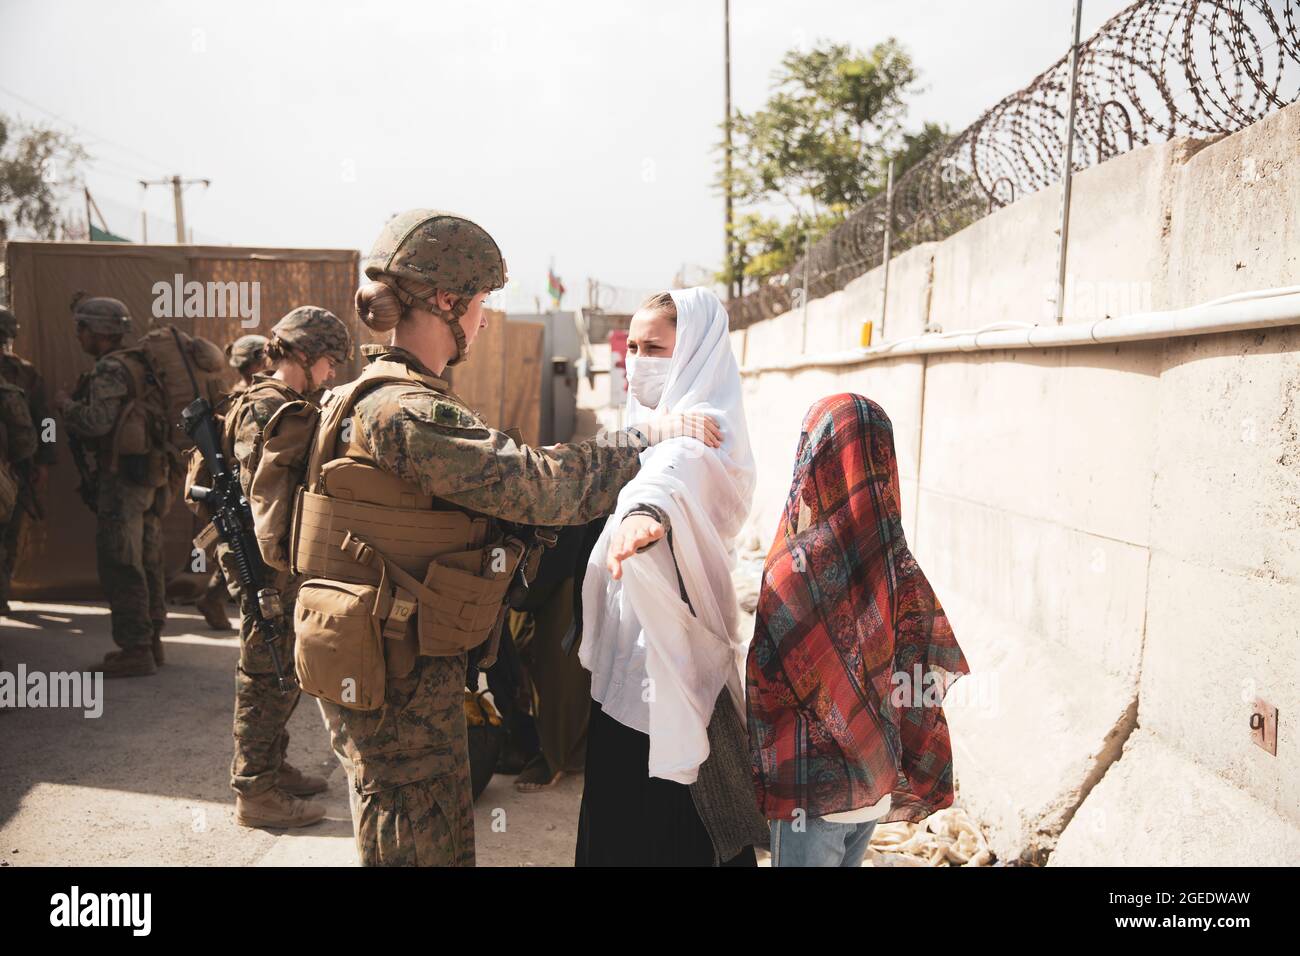 A Marine checks two civilians during processing through an Evacuee Control Checkpoint (ECC) during an evacuation at Hamid Karzai International Airport, Kabul, Afghanistan, Aug. 18. U.S. Marines are assisting the Department of State with an orderly drawdown of designated personnel in Afghanistan. (U.S. Marine Corps photo by Staff Sgt. Victor Mancilla) Stock Photo